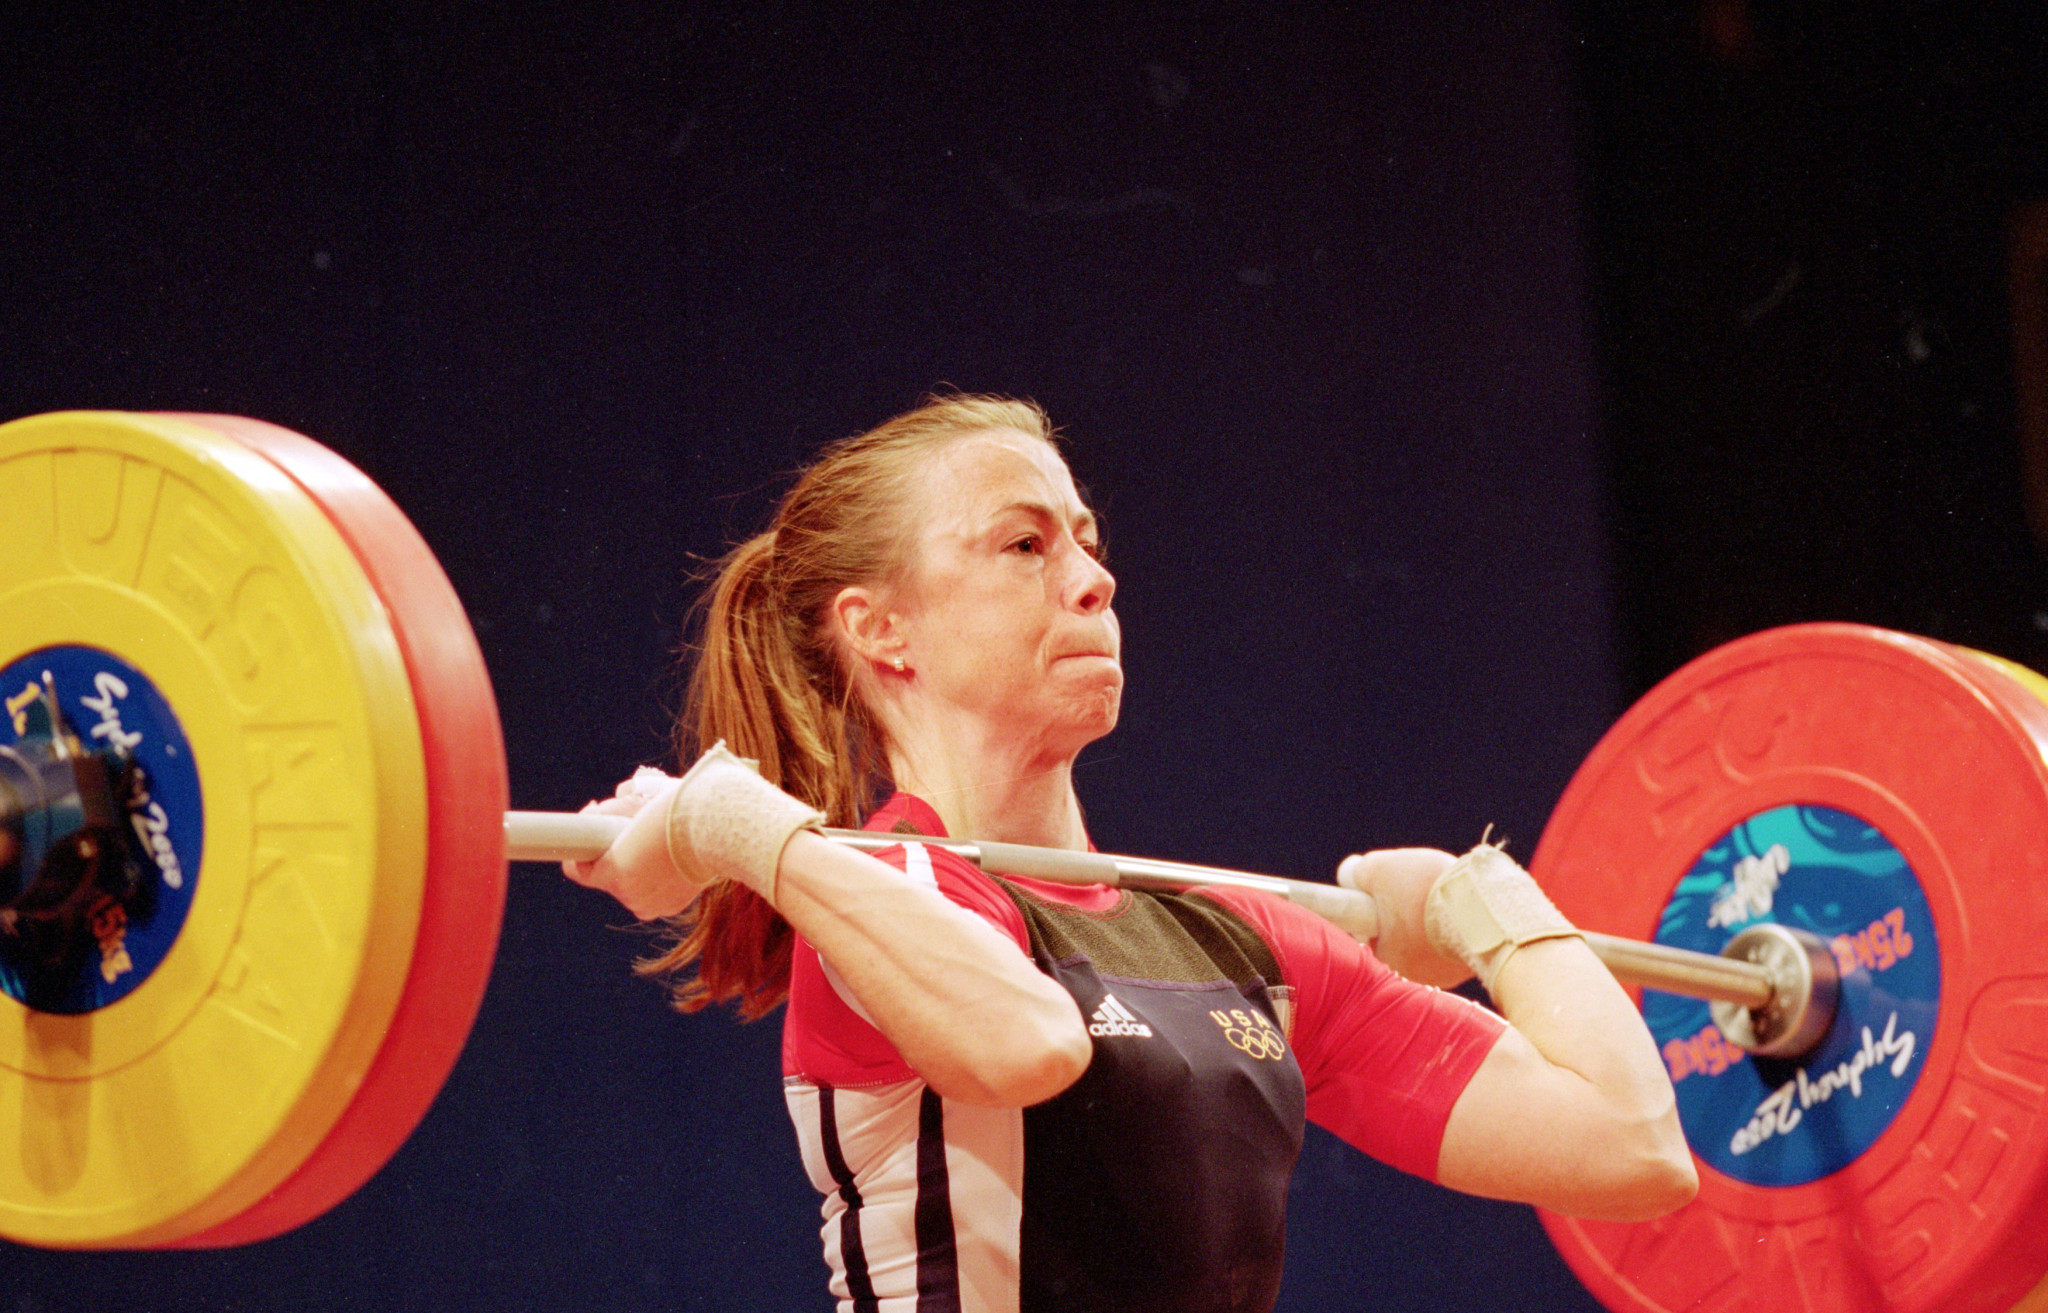 Tara Nott, of the United States, lifts the bar in the Womens Weightlifting during the Sydney 2000 Olympic Games ©Getty Images